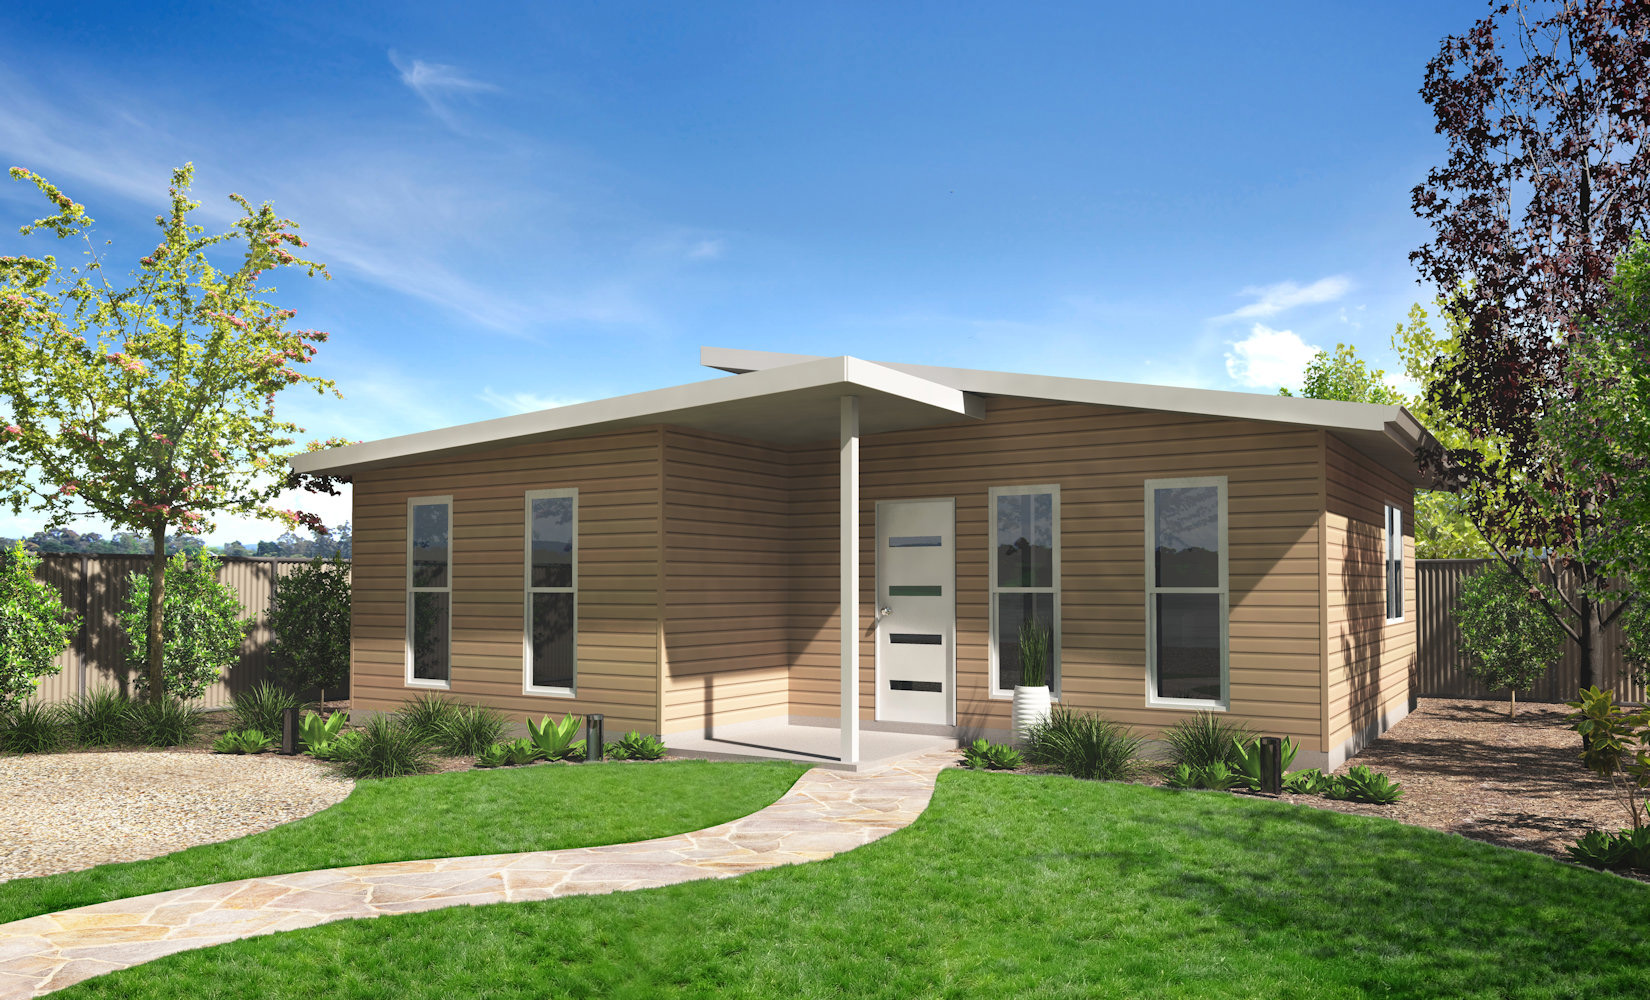 Our Guide to Building & Financing a Granny Flat